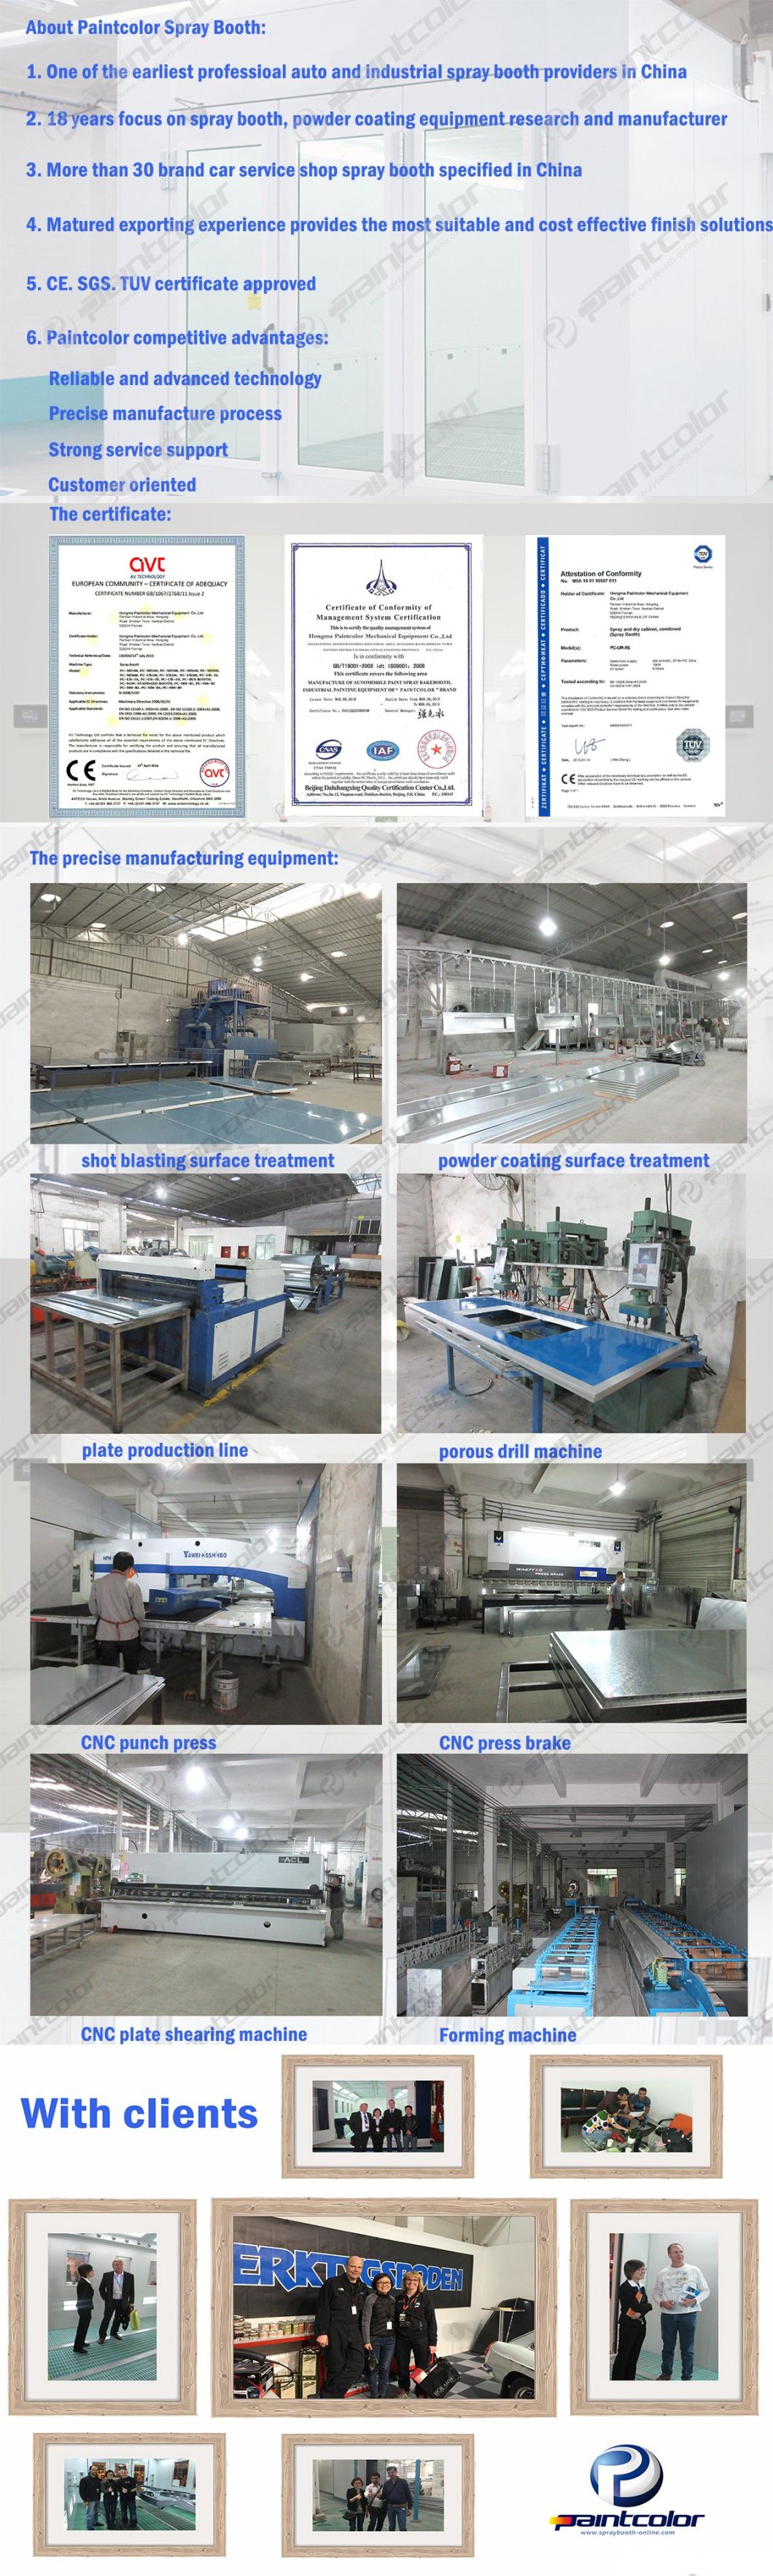 Paintcolor Brand Paint Line for Car and Industrial Paintings Multi Booth Car Spray Paint Booth Production Line